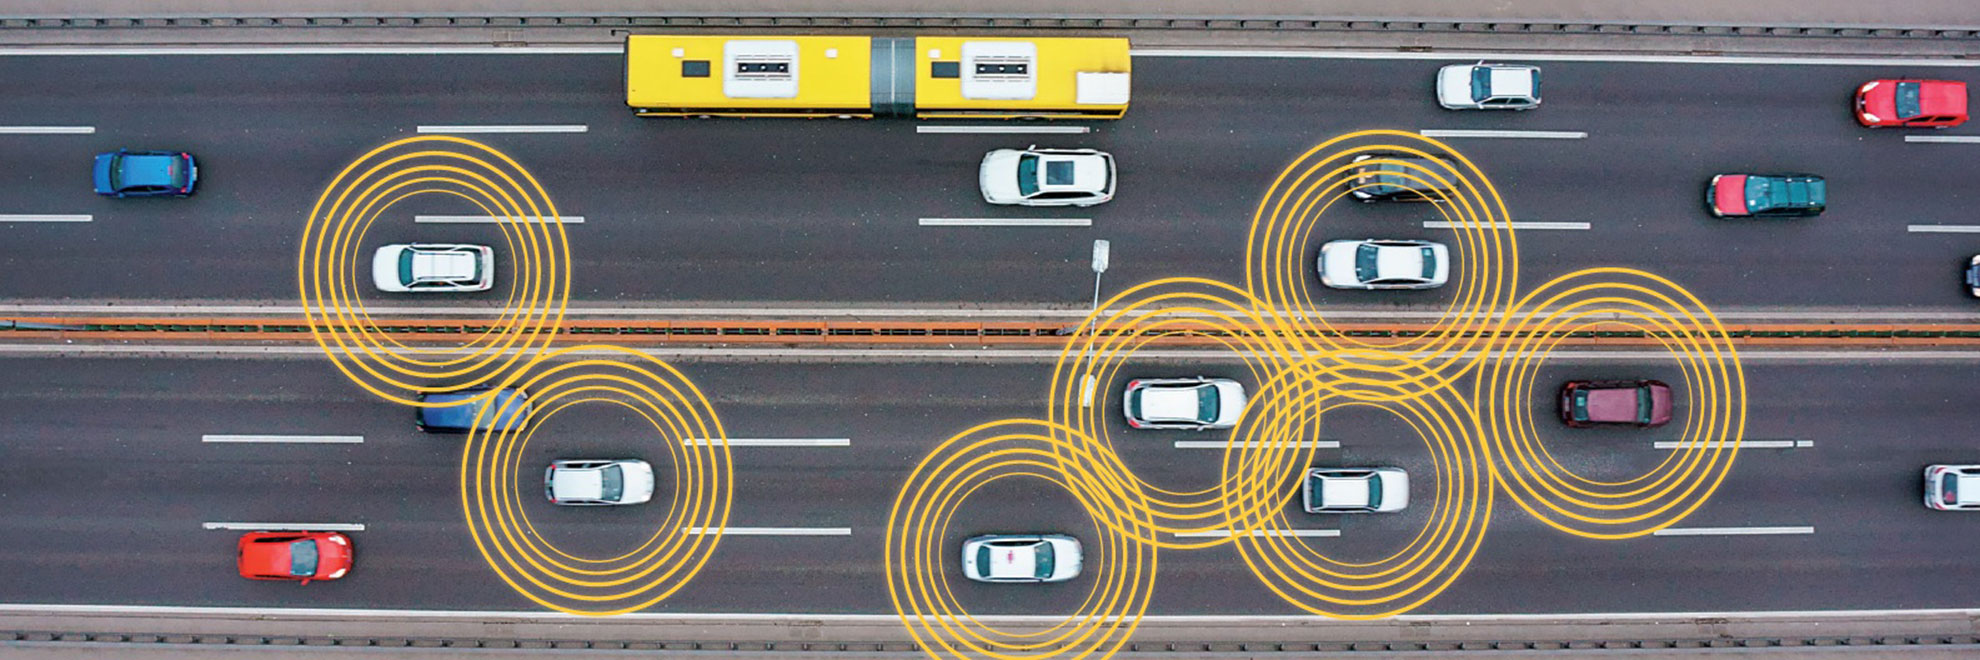 Cybersecurity for the Connected Vehicle